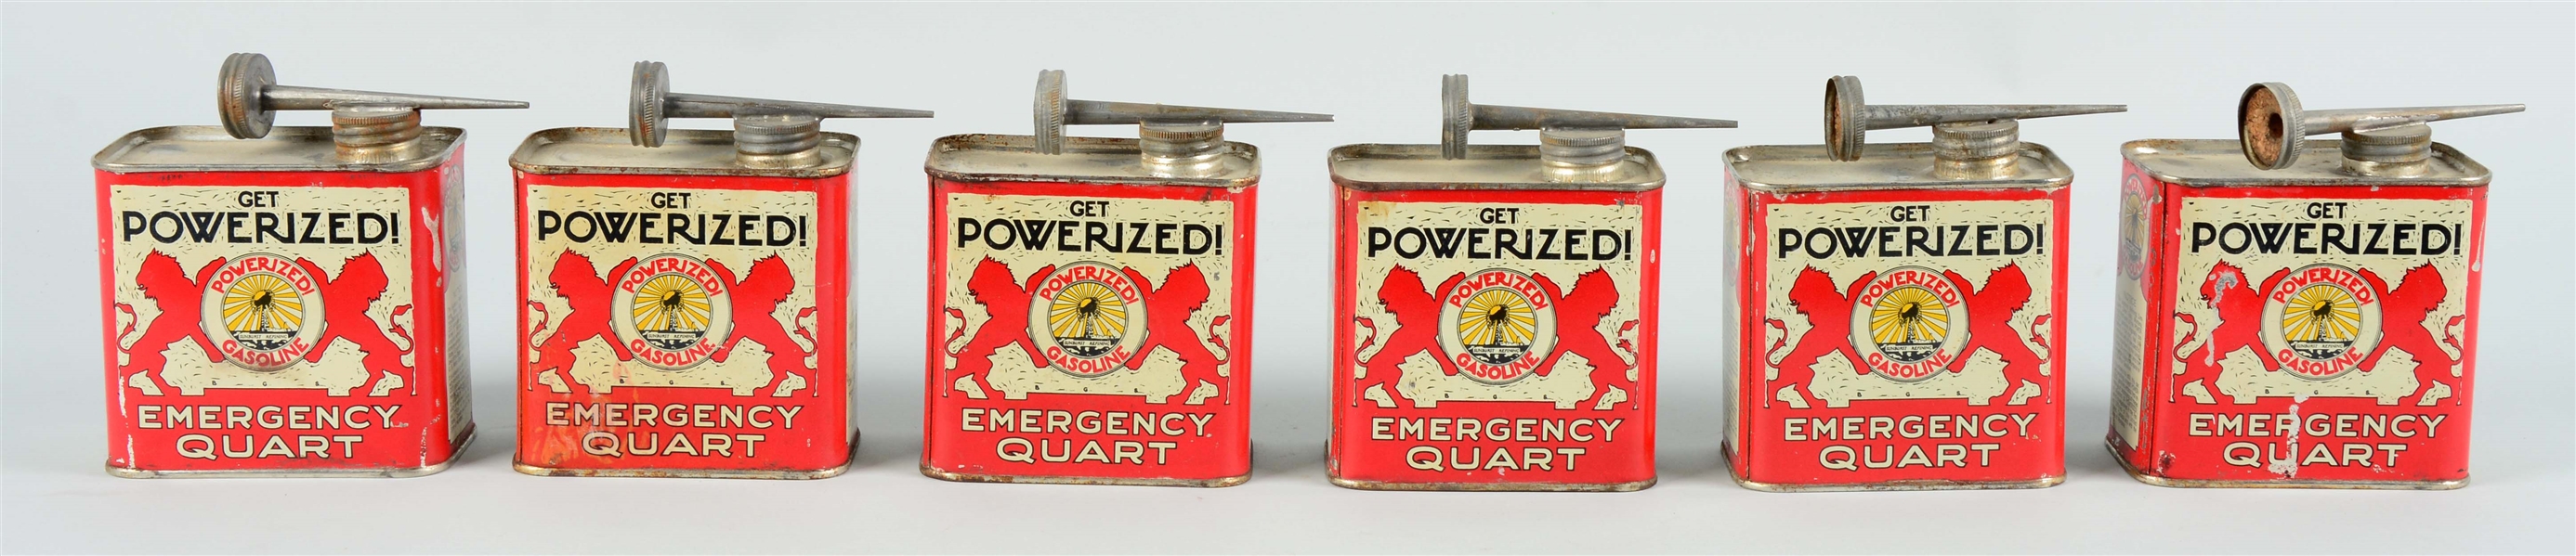 LOT OF 6: GET POWERIZED EMERGENCY QUART CANS.